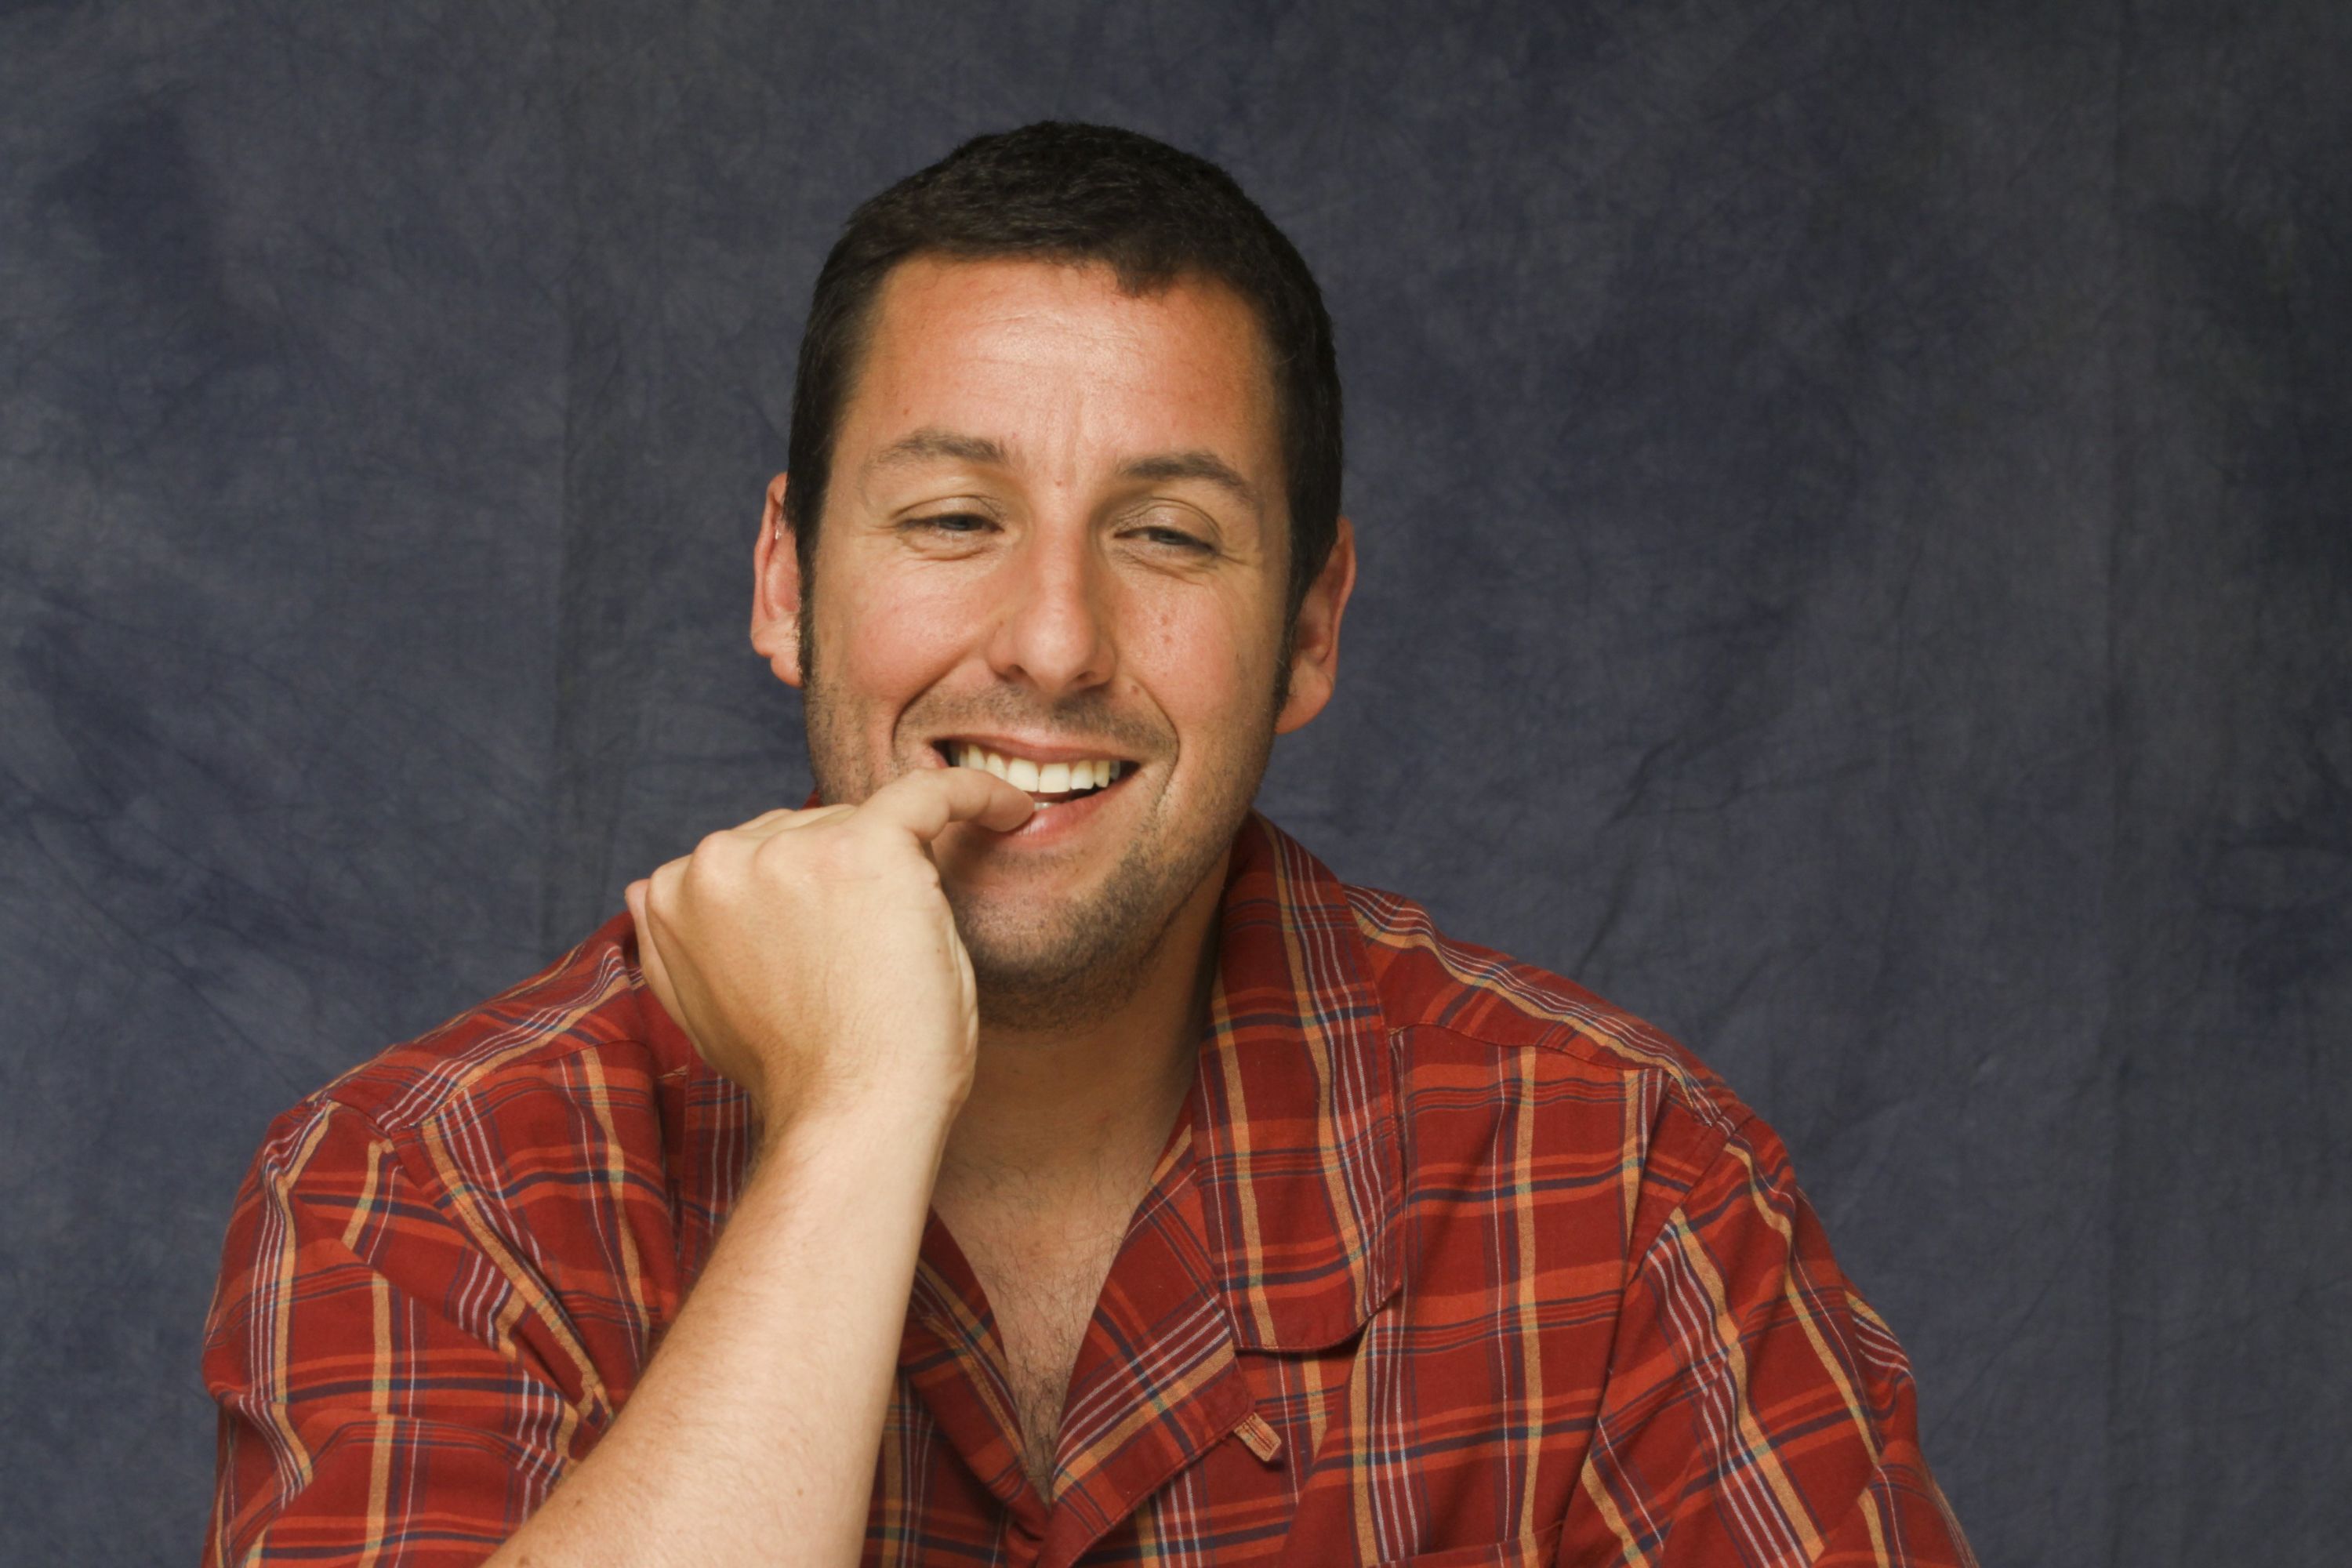 Adam Sandler poses for a portrait in 2009.